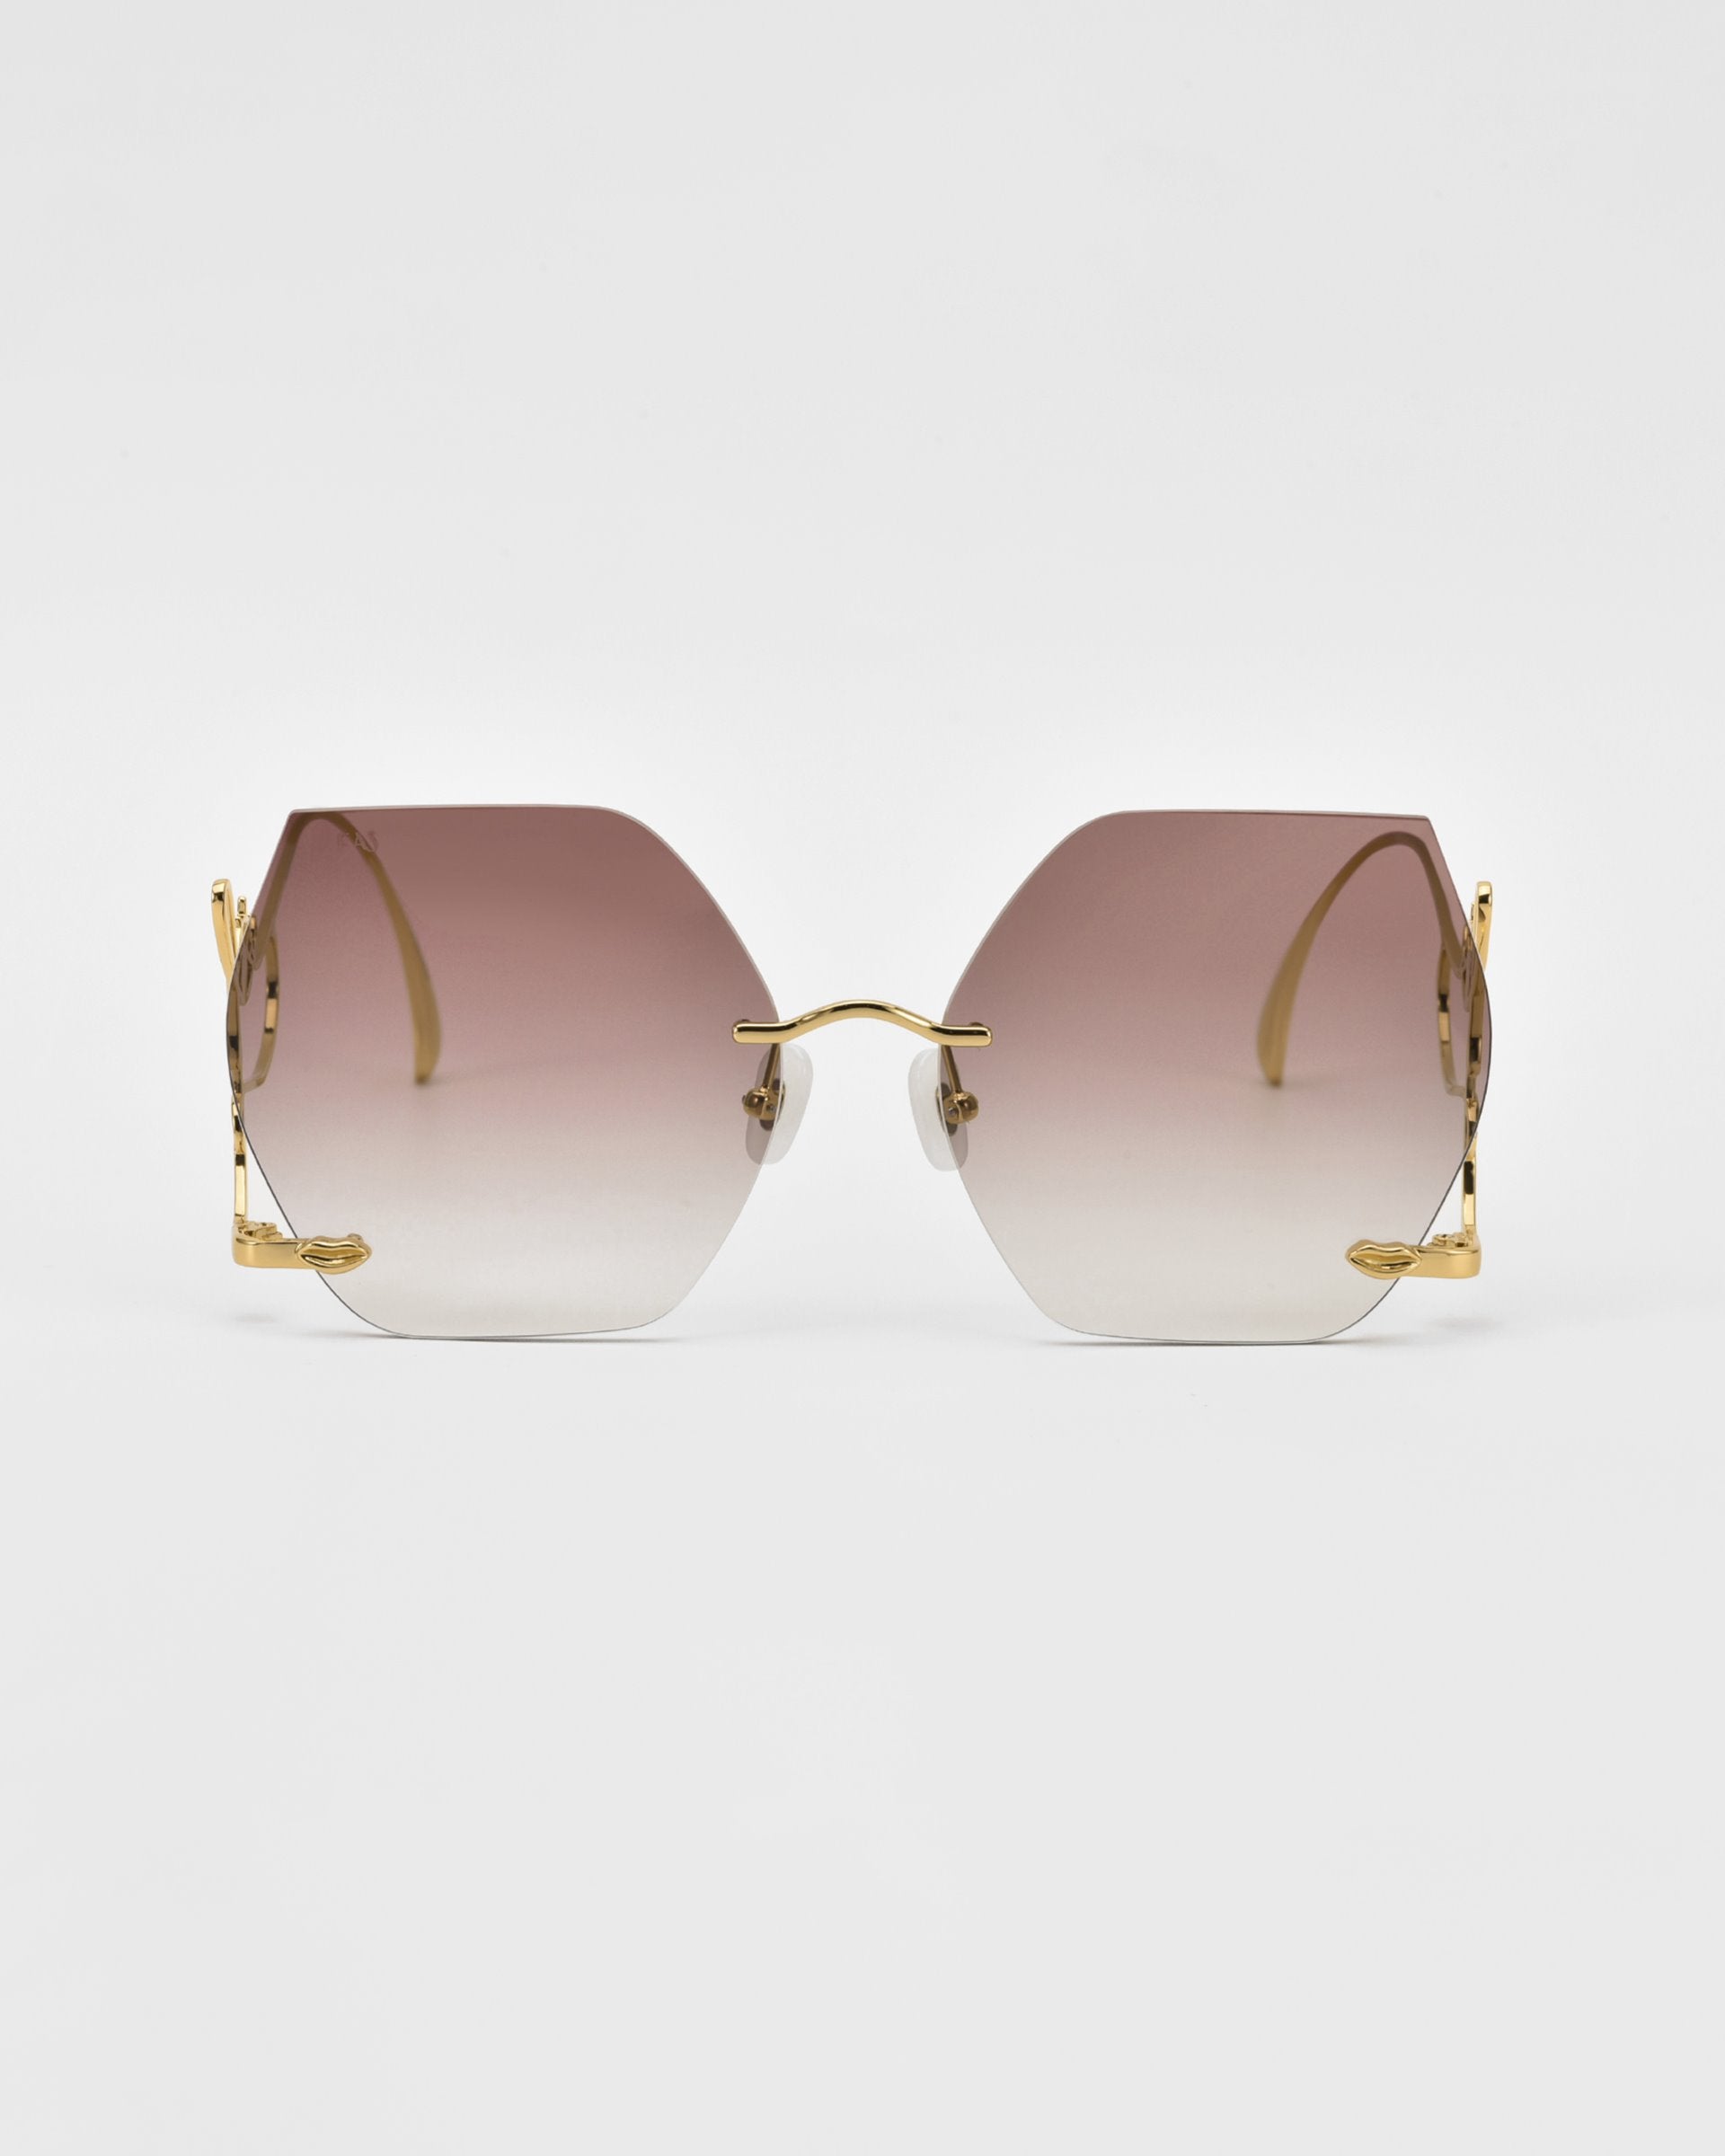 A pair of limited edition Cry Me a River hexagonal sunglasses with gradient lenses transitioning from dark brown at the top to clear at the bottom. The sunglasses feature gold-toned metal temples and a minimalist frame design, set against a plain white background. The brand is For Art&#39;s Sake®.